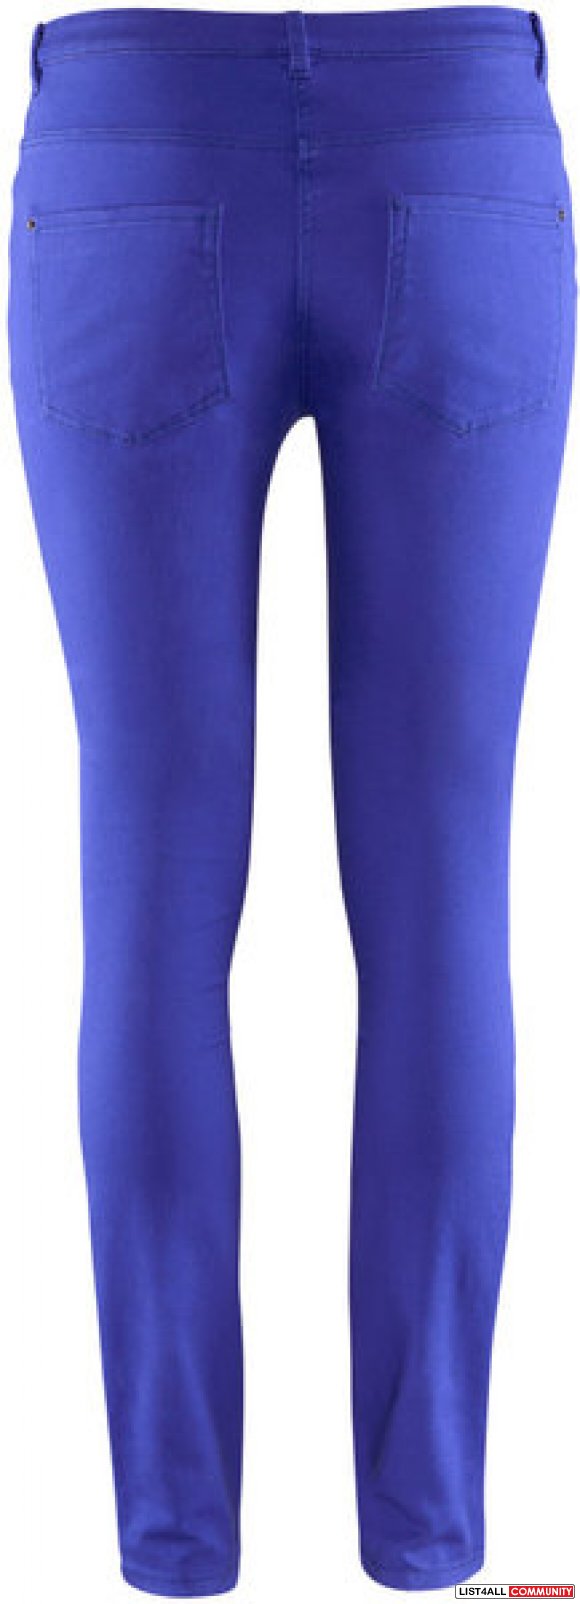 H&M Cobalt Electric Blue Pants Size 26 (New With Tags)